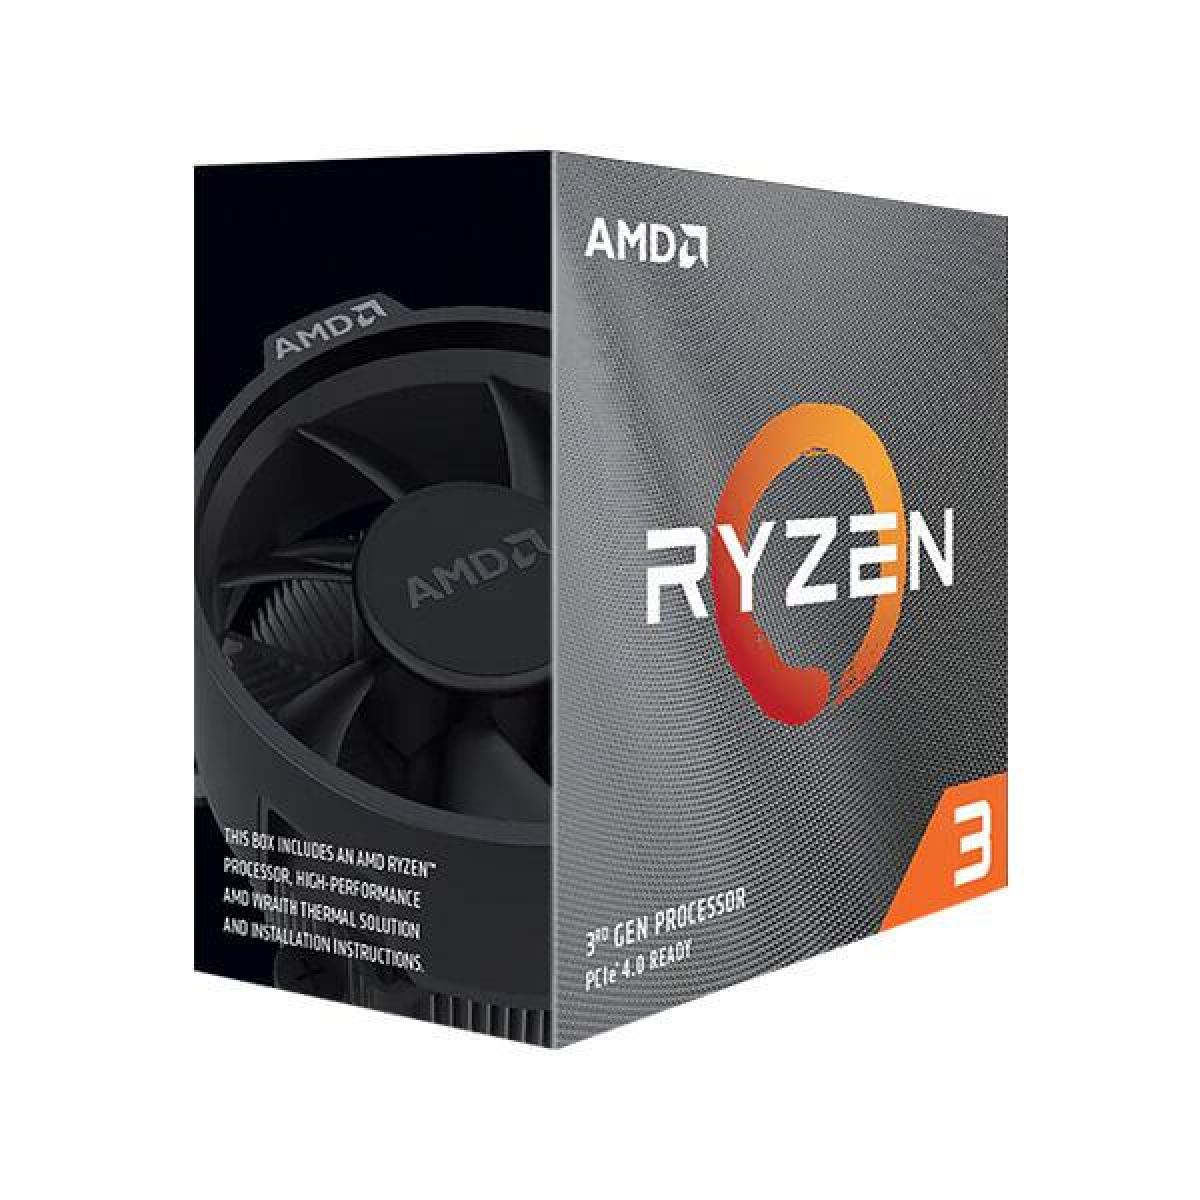 AMD Ryzen 3 3100 4-Cores Up to 3.9GHz Max Boost